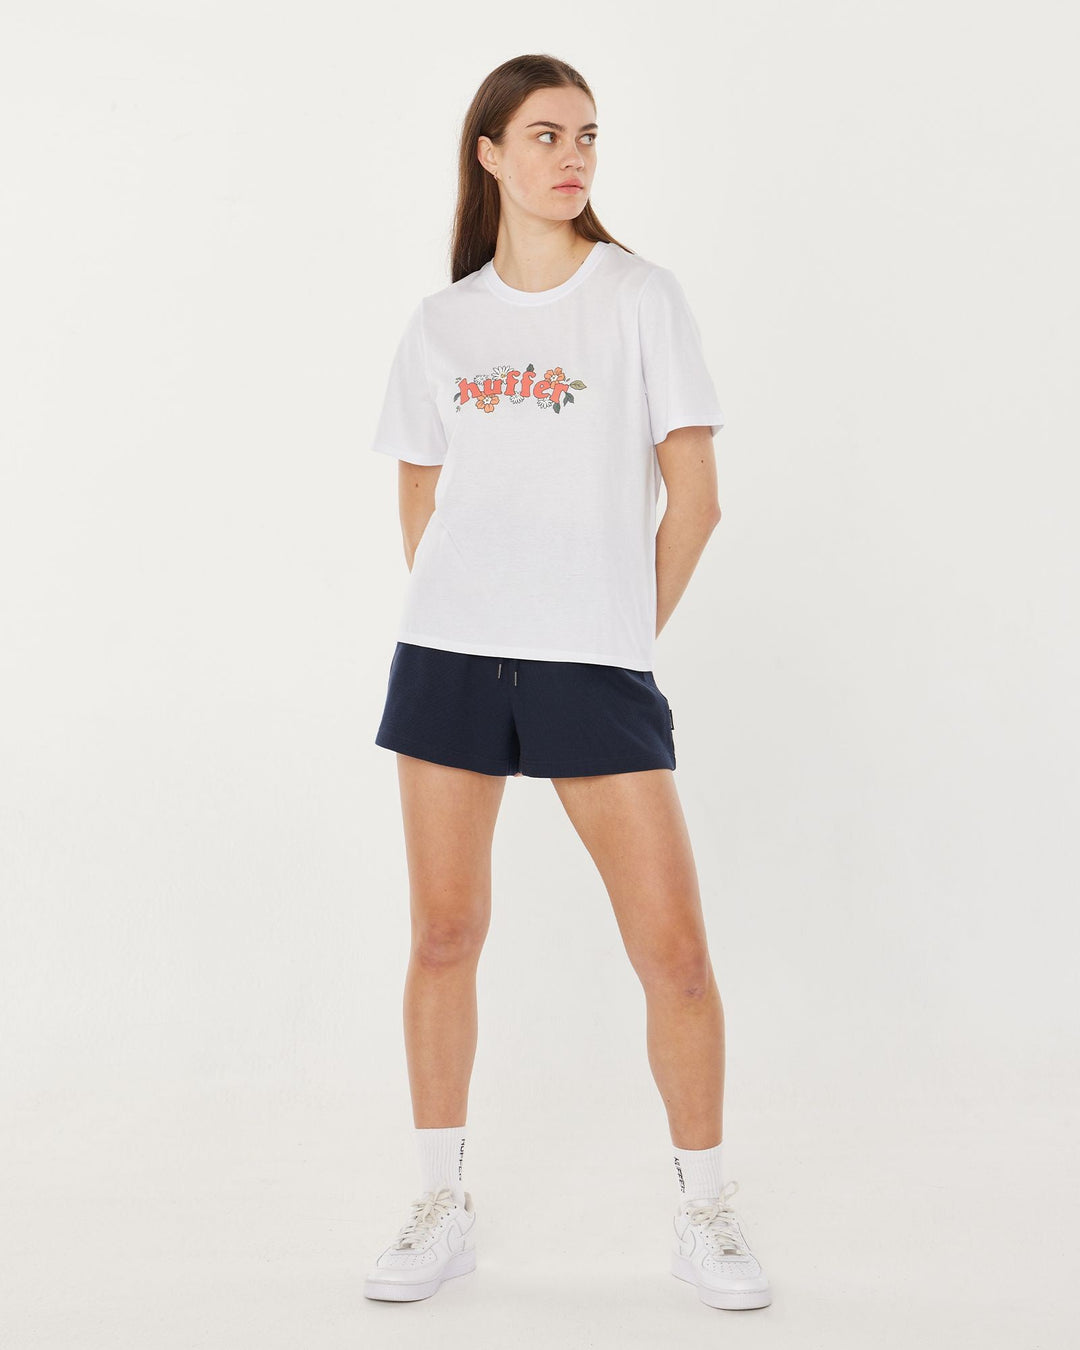 WMNS Classic Tee Blooming - Chillis & More NZ